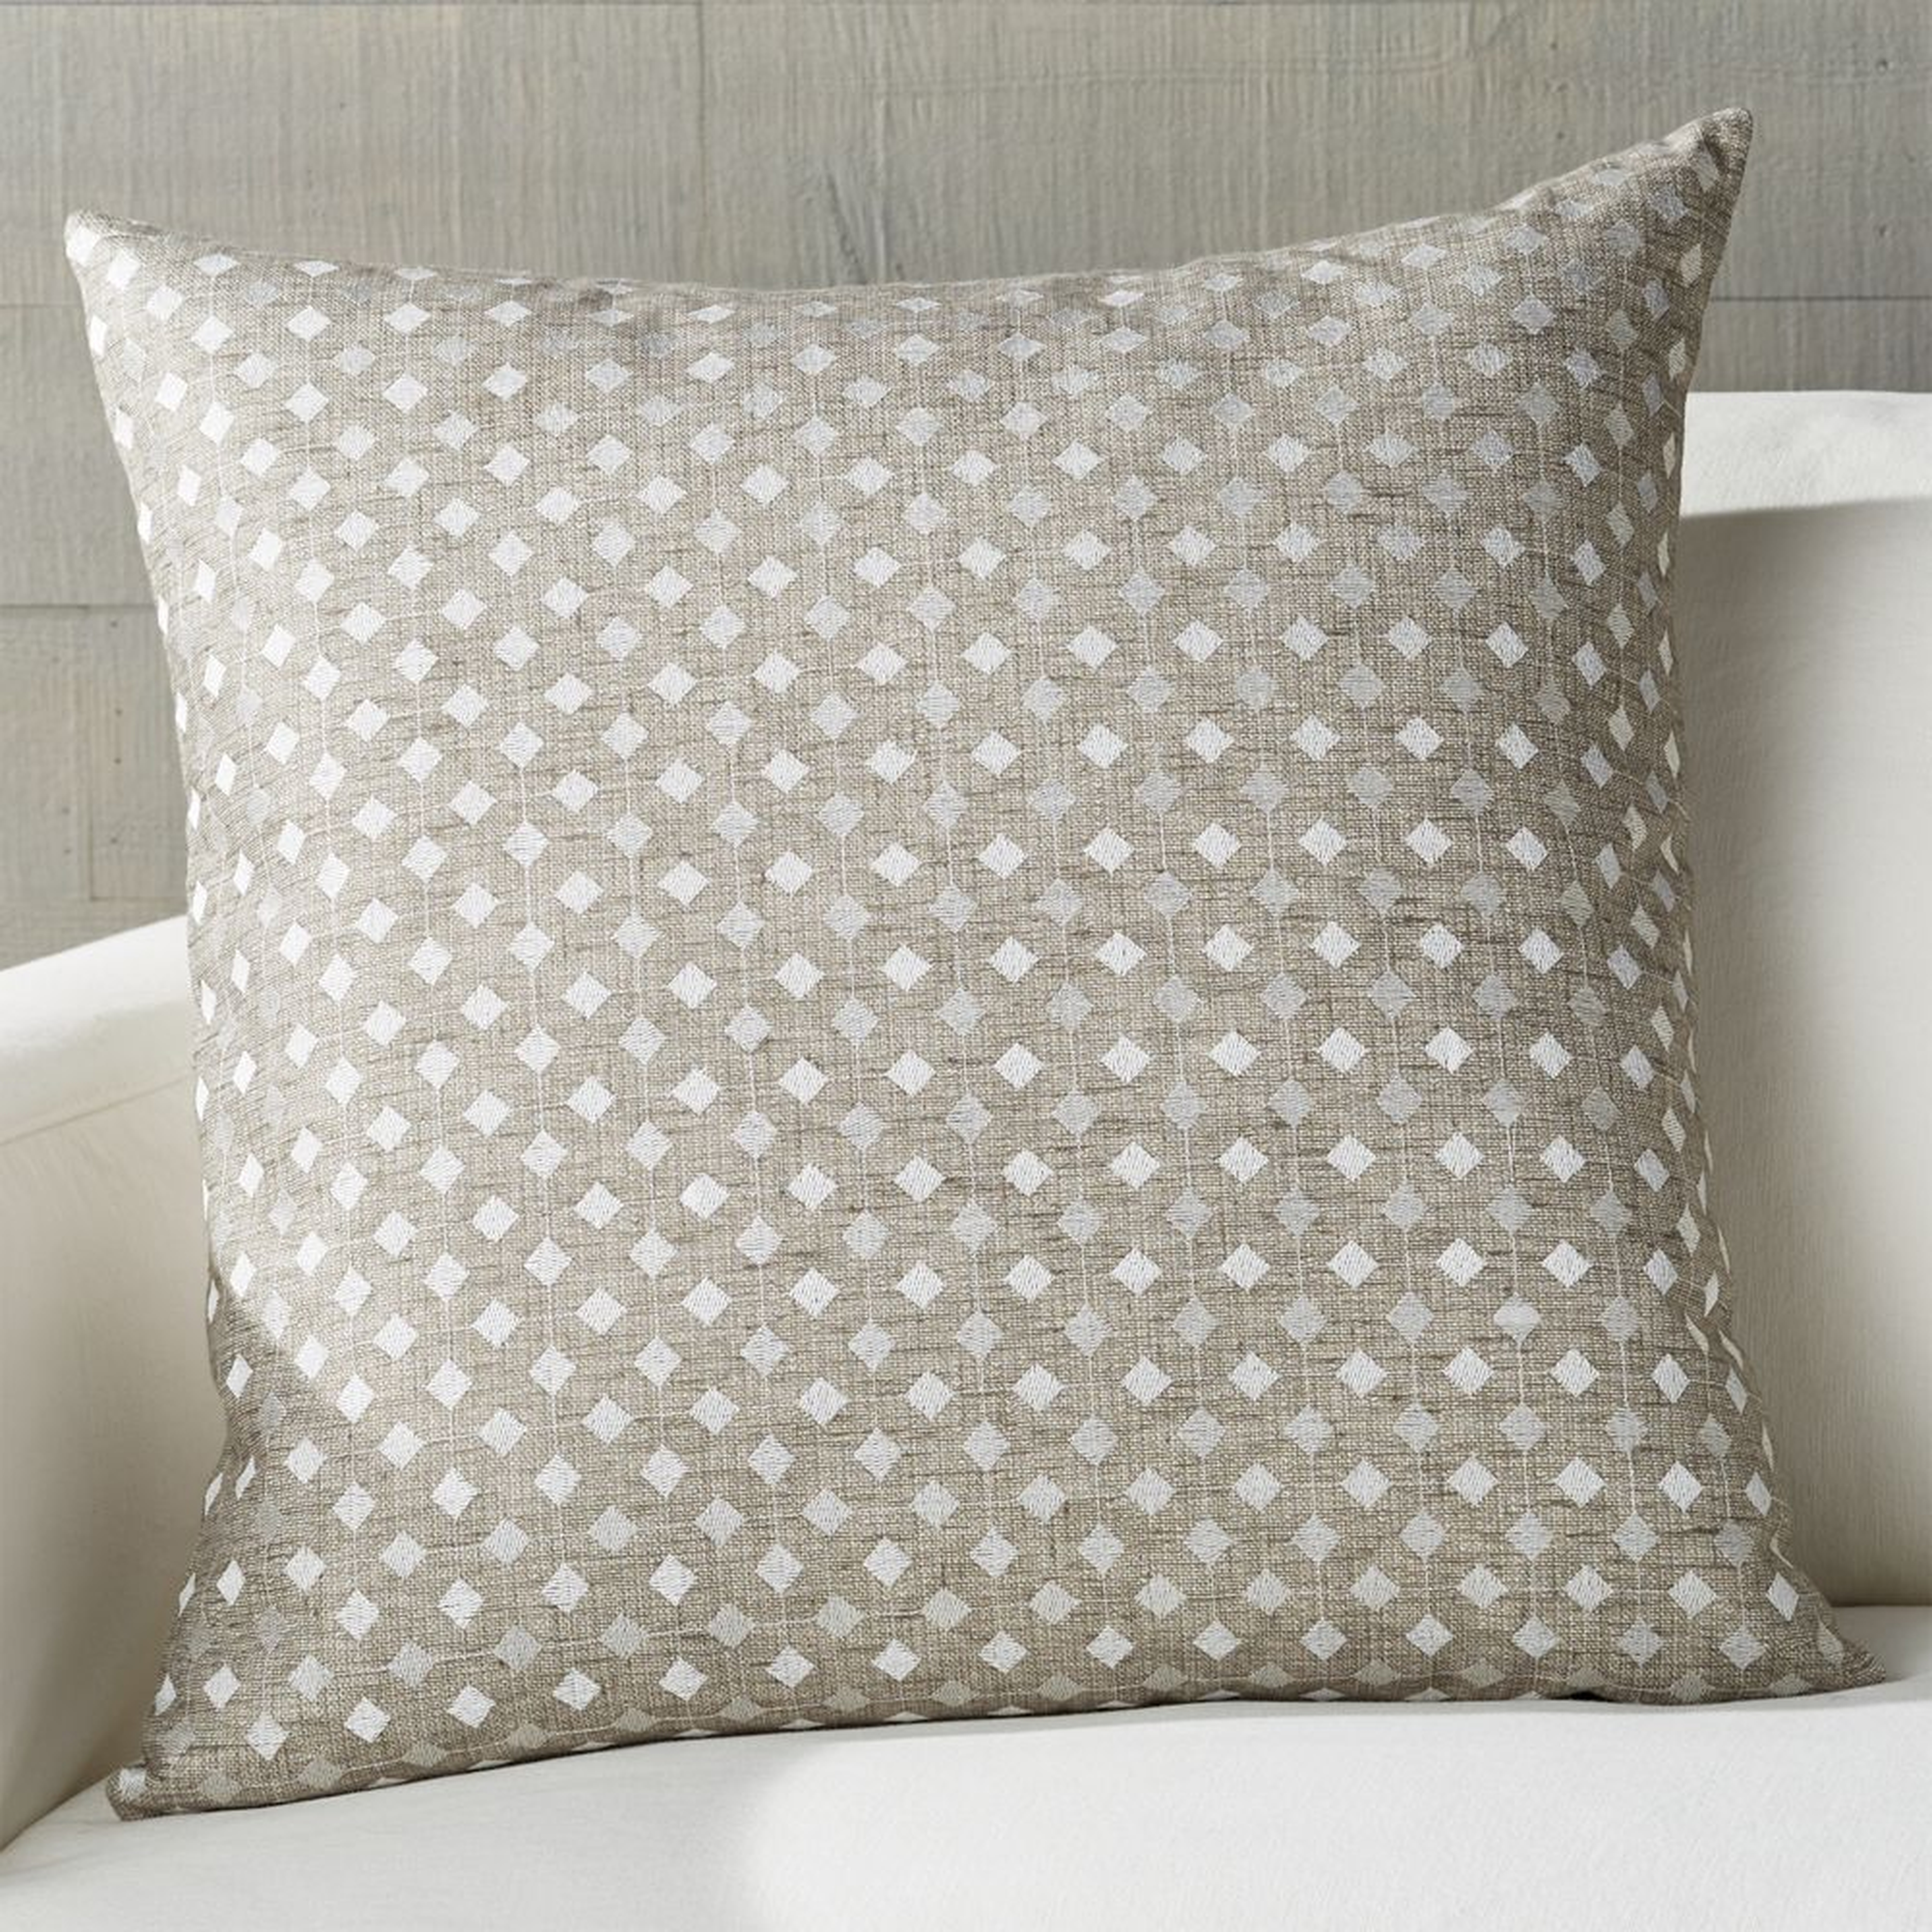 Sander Grey Embroidered Pillow with Feather-Down Insert 23" - Crate and Barrel